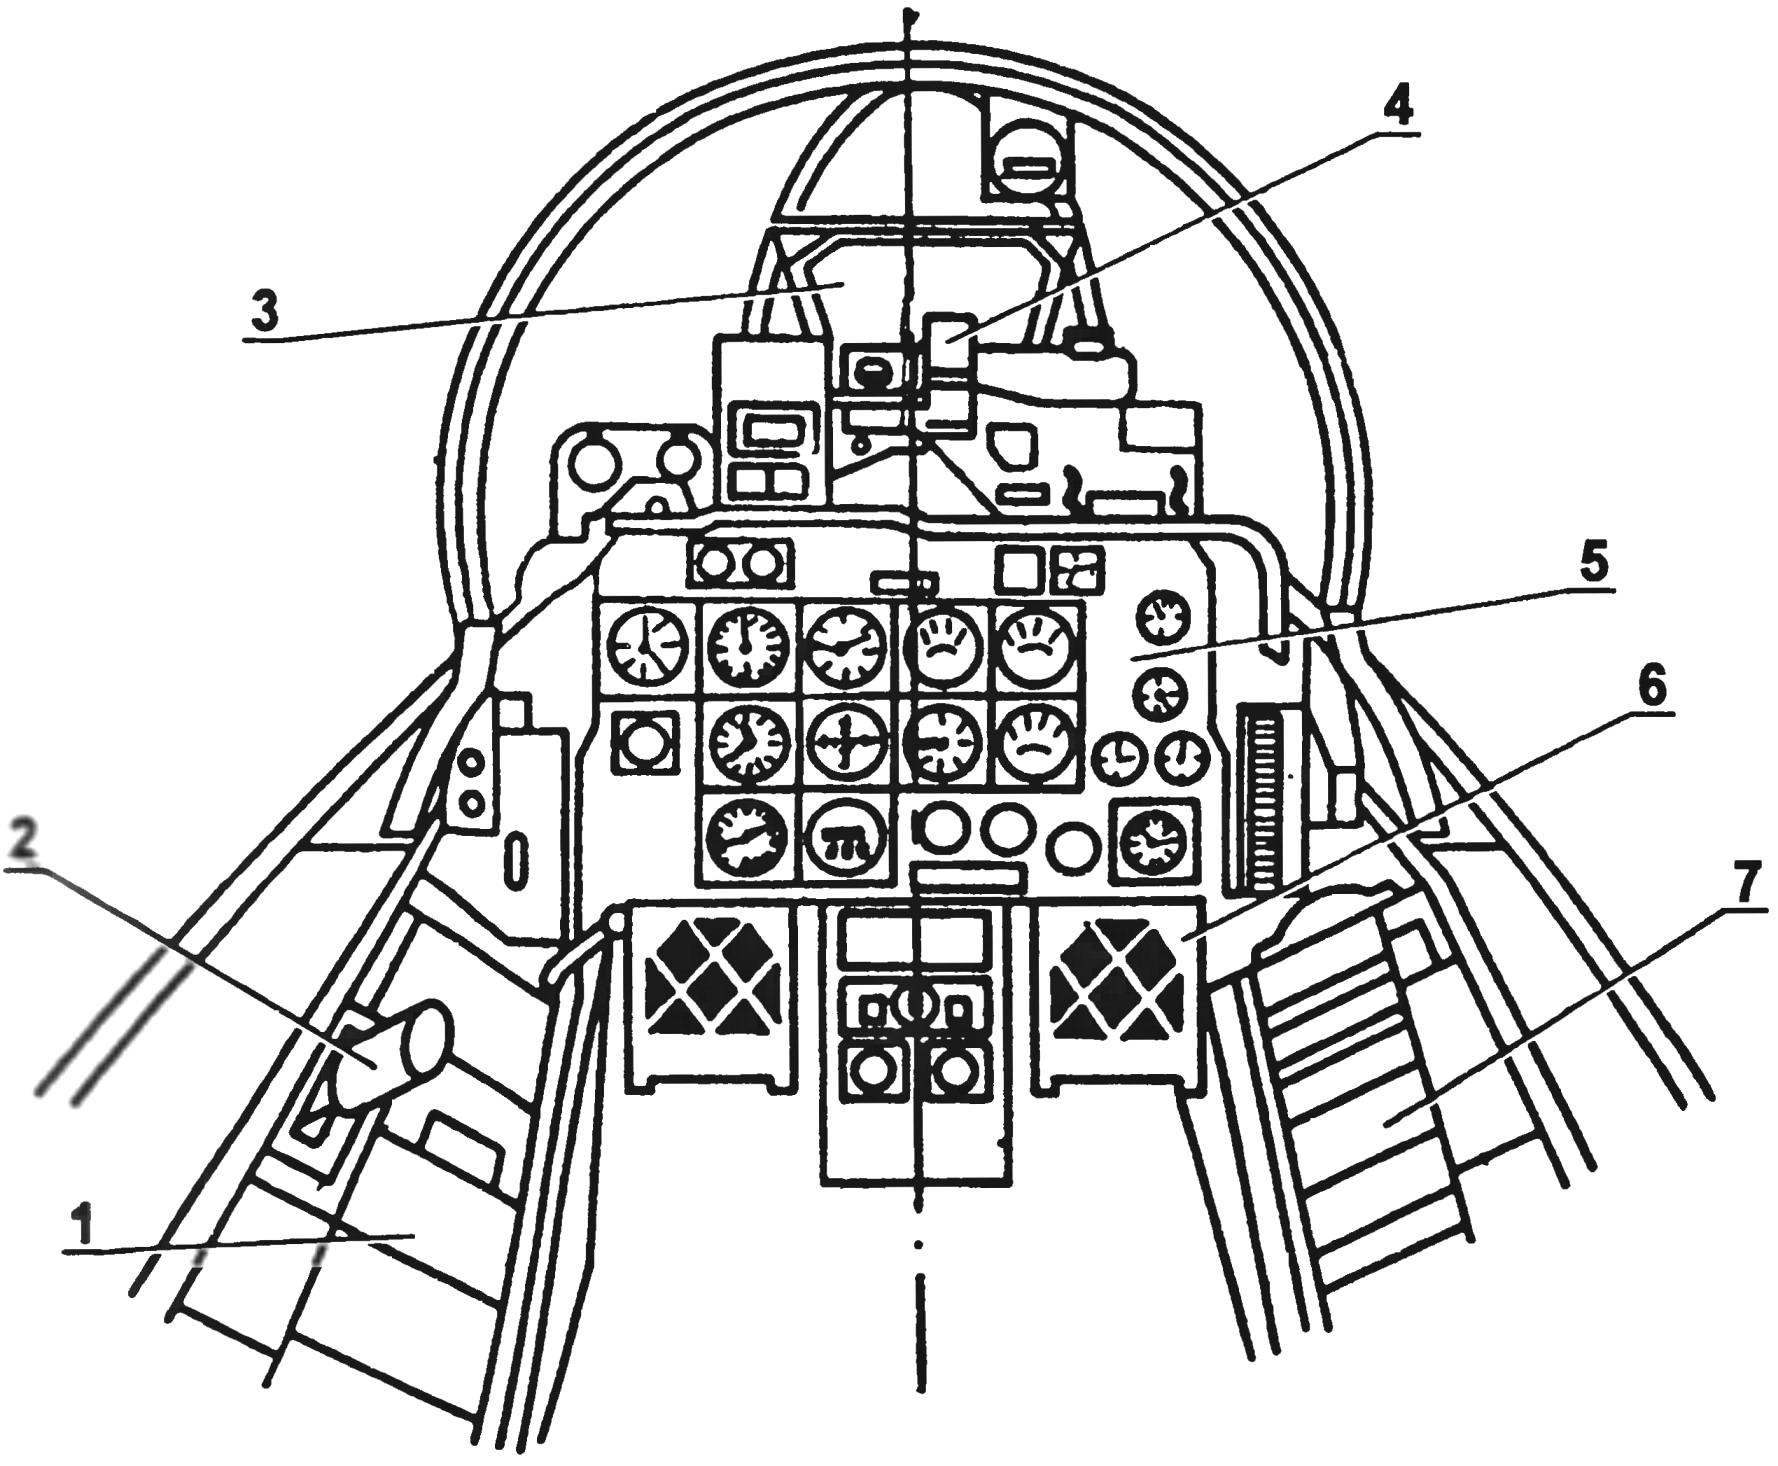 Fig. 3. The cockpit